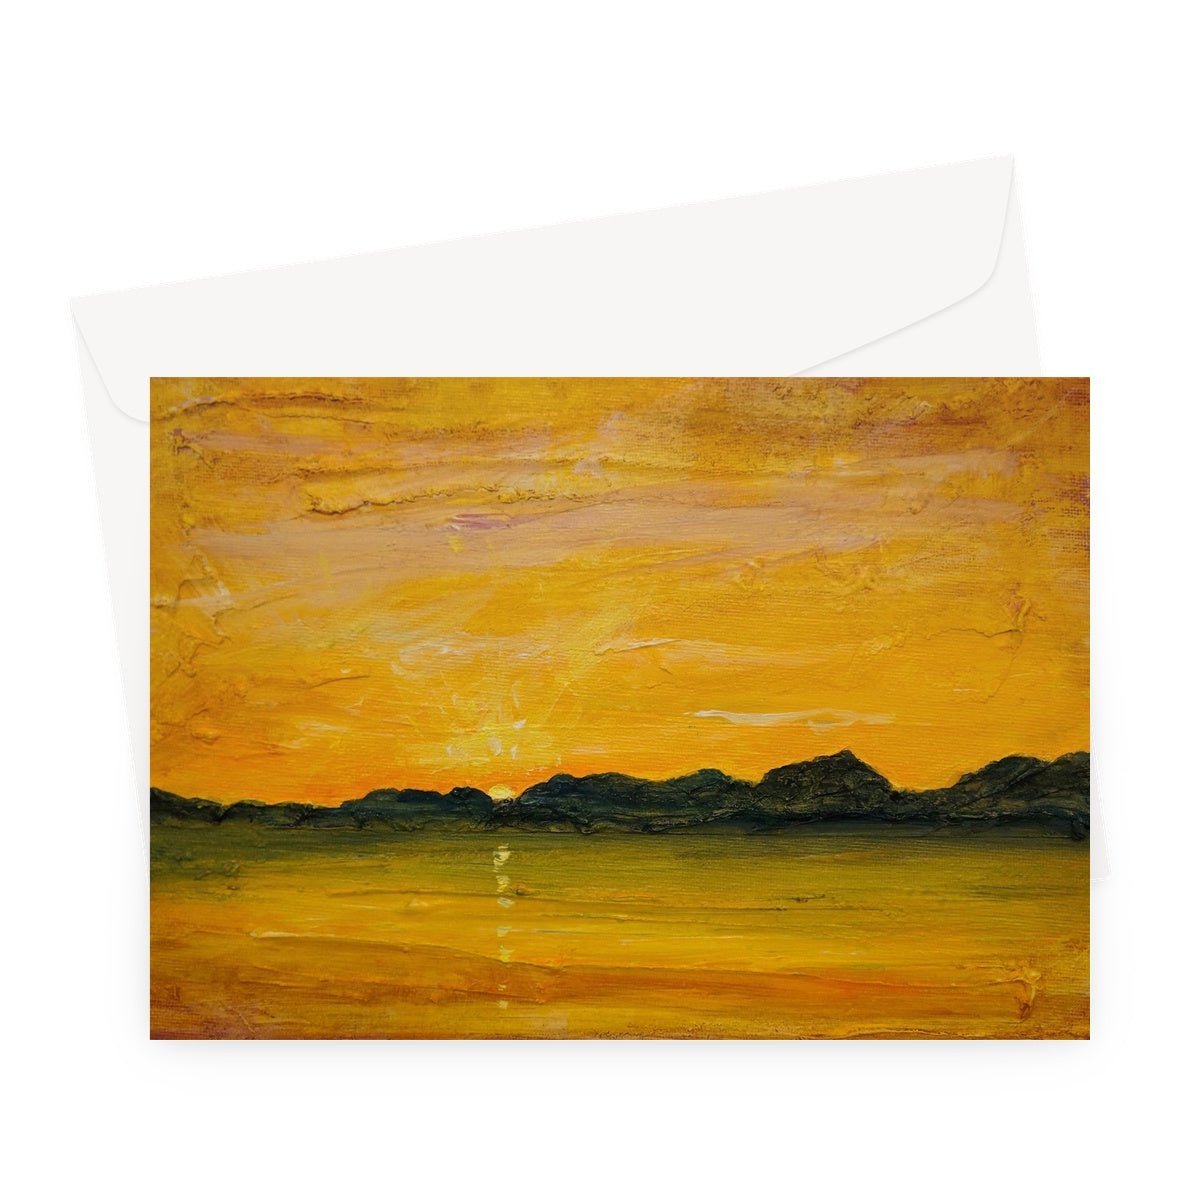 Jura Sunset Art Gifts Greeting Card-Greetings Cards-Hebridean Islands Art Gallery-A5 Landscape-10 Cards-Paintings, Prints, Homeware, Art Gifts From Scotland By Scottish Artist Kevin Hunter